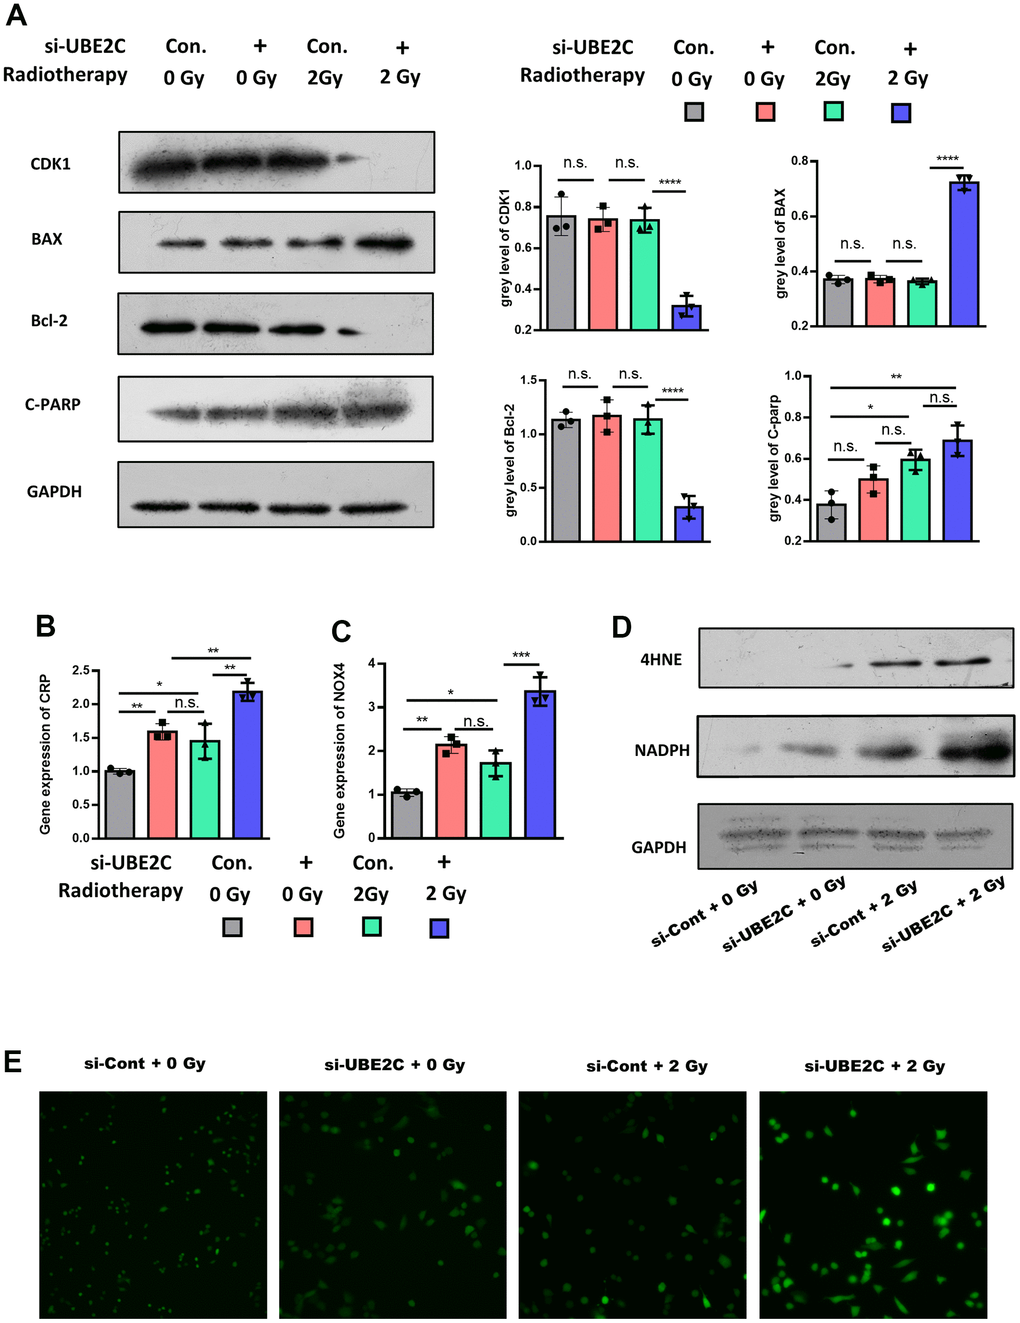 UBE2C confers radiotherapy resistance of HNSCC by regulating oxidative-stress-induced apoptosis through 4-HNE signaling. (A) Western blot results of proliferation relative protein (CDK1), anti-apoptosis relative protein (Bcl-2) and apoptosis relative protein (C-PARP, BAX) in Si-UBE2C/Cont CAL27 cells under 0/2 Gy radiation. (B) RT-PCR results of CRP gene expression in Si-UBE2C/Cont CAL27 cells under 0/2 Gy radiation after 24h. (C) RT-PCR results of NOX4 gene expression in Si-UBE2C/Cont CAL27 cells under 0/2 Gy radiation after 24h. (D) Western blot results of oxidative stress relative protein (4-HNE and NADPH) in Si-UBE2C/Cont CAL27 cells under 0/2 Gy radiation. (E) ROS level in Si-UBE2C/Cont CAL27 cells under 0/2 Gy radiation. *P 